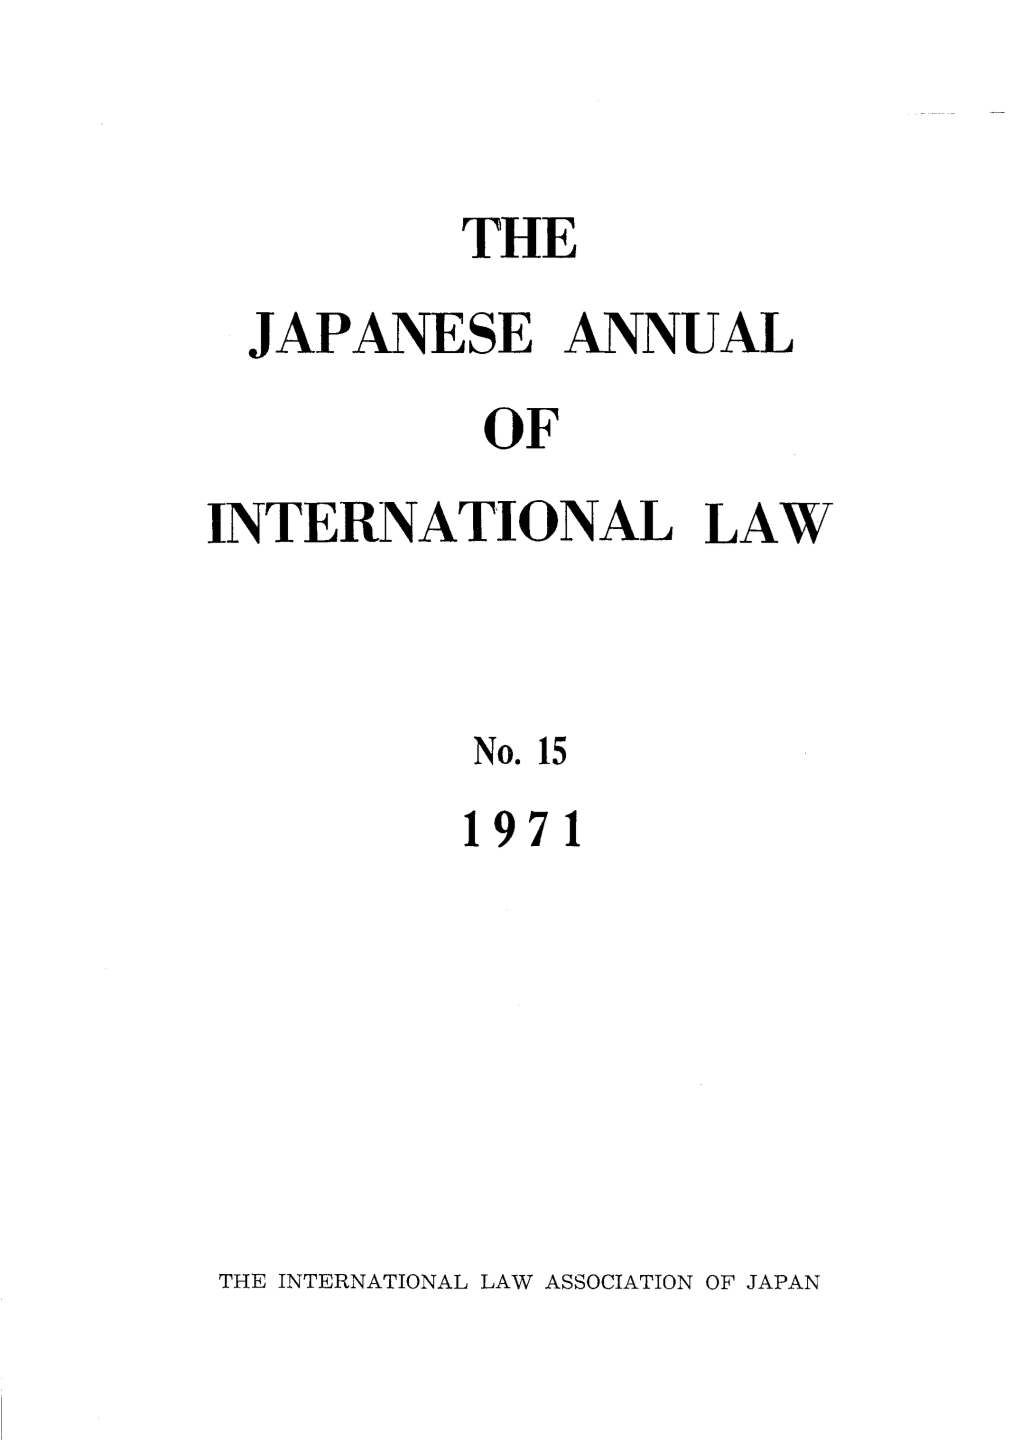 The Japanese Annual of International Law